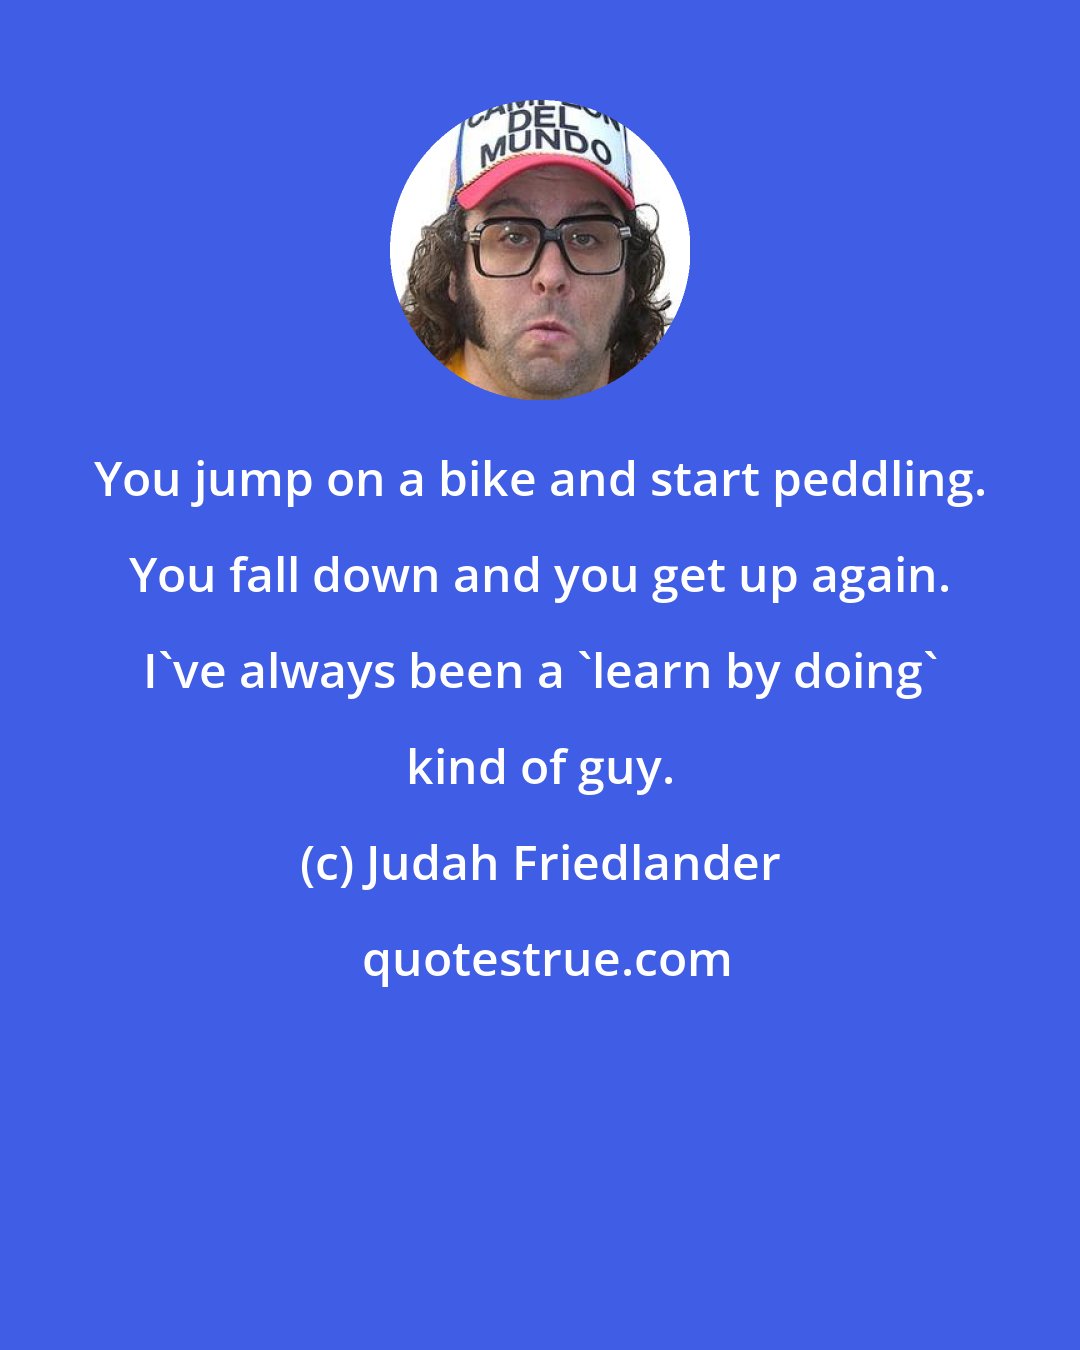 Judah Friedlander: You jump on a bike and start peddling. You fall down and you get up again. I've always been a 'learn by doing' kind of guy.